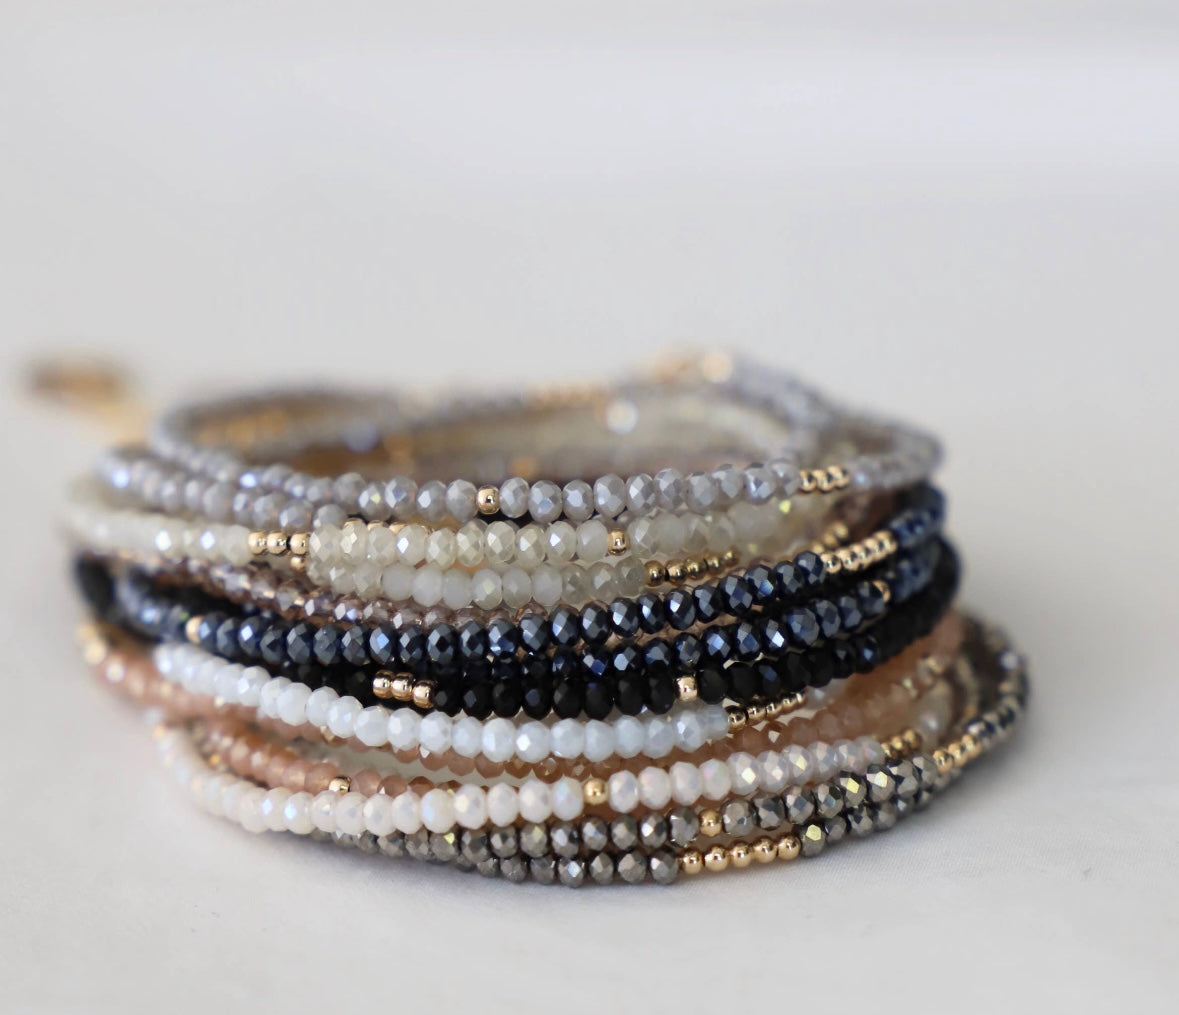 Simply Irresistible Double Wrap Crystal Bracelet/Choker Necklace